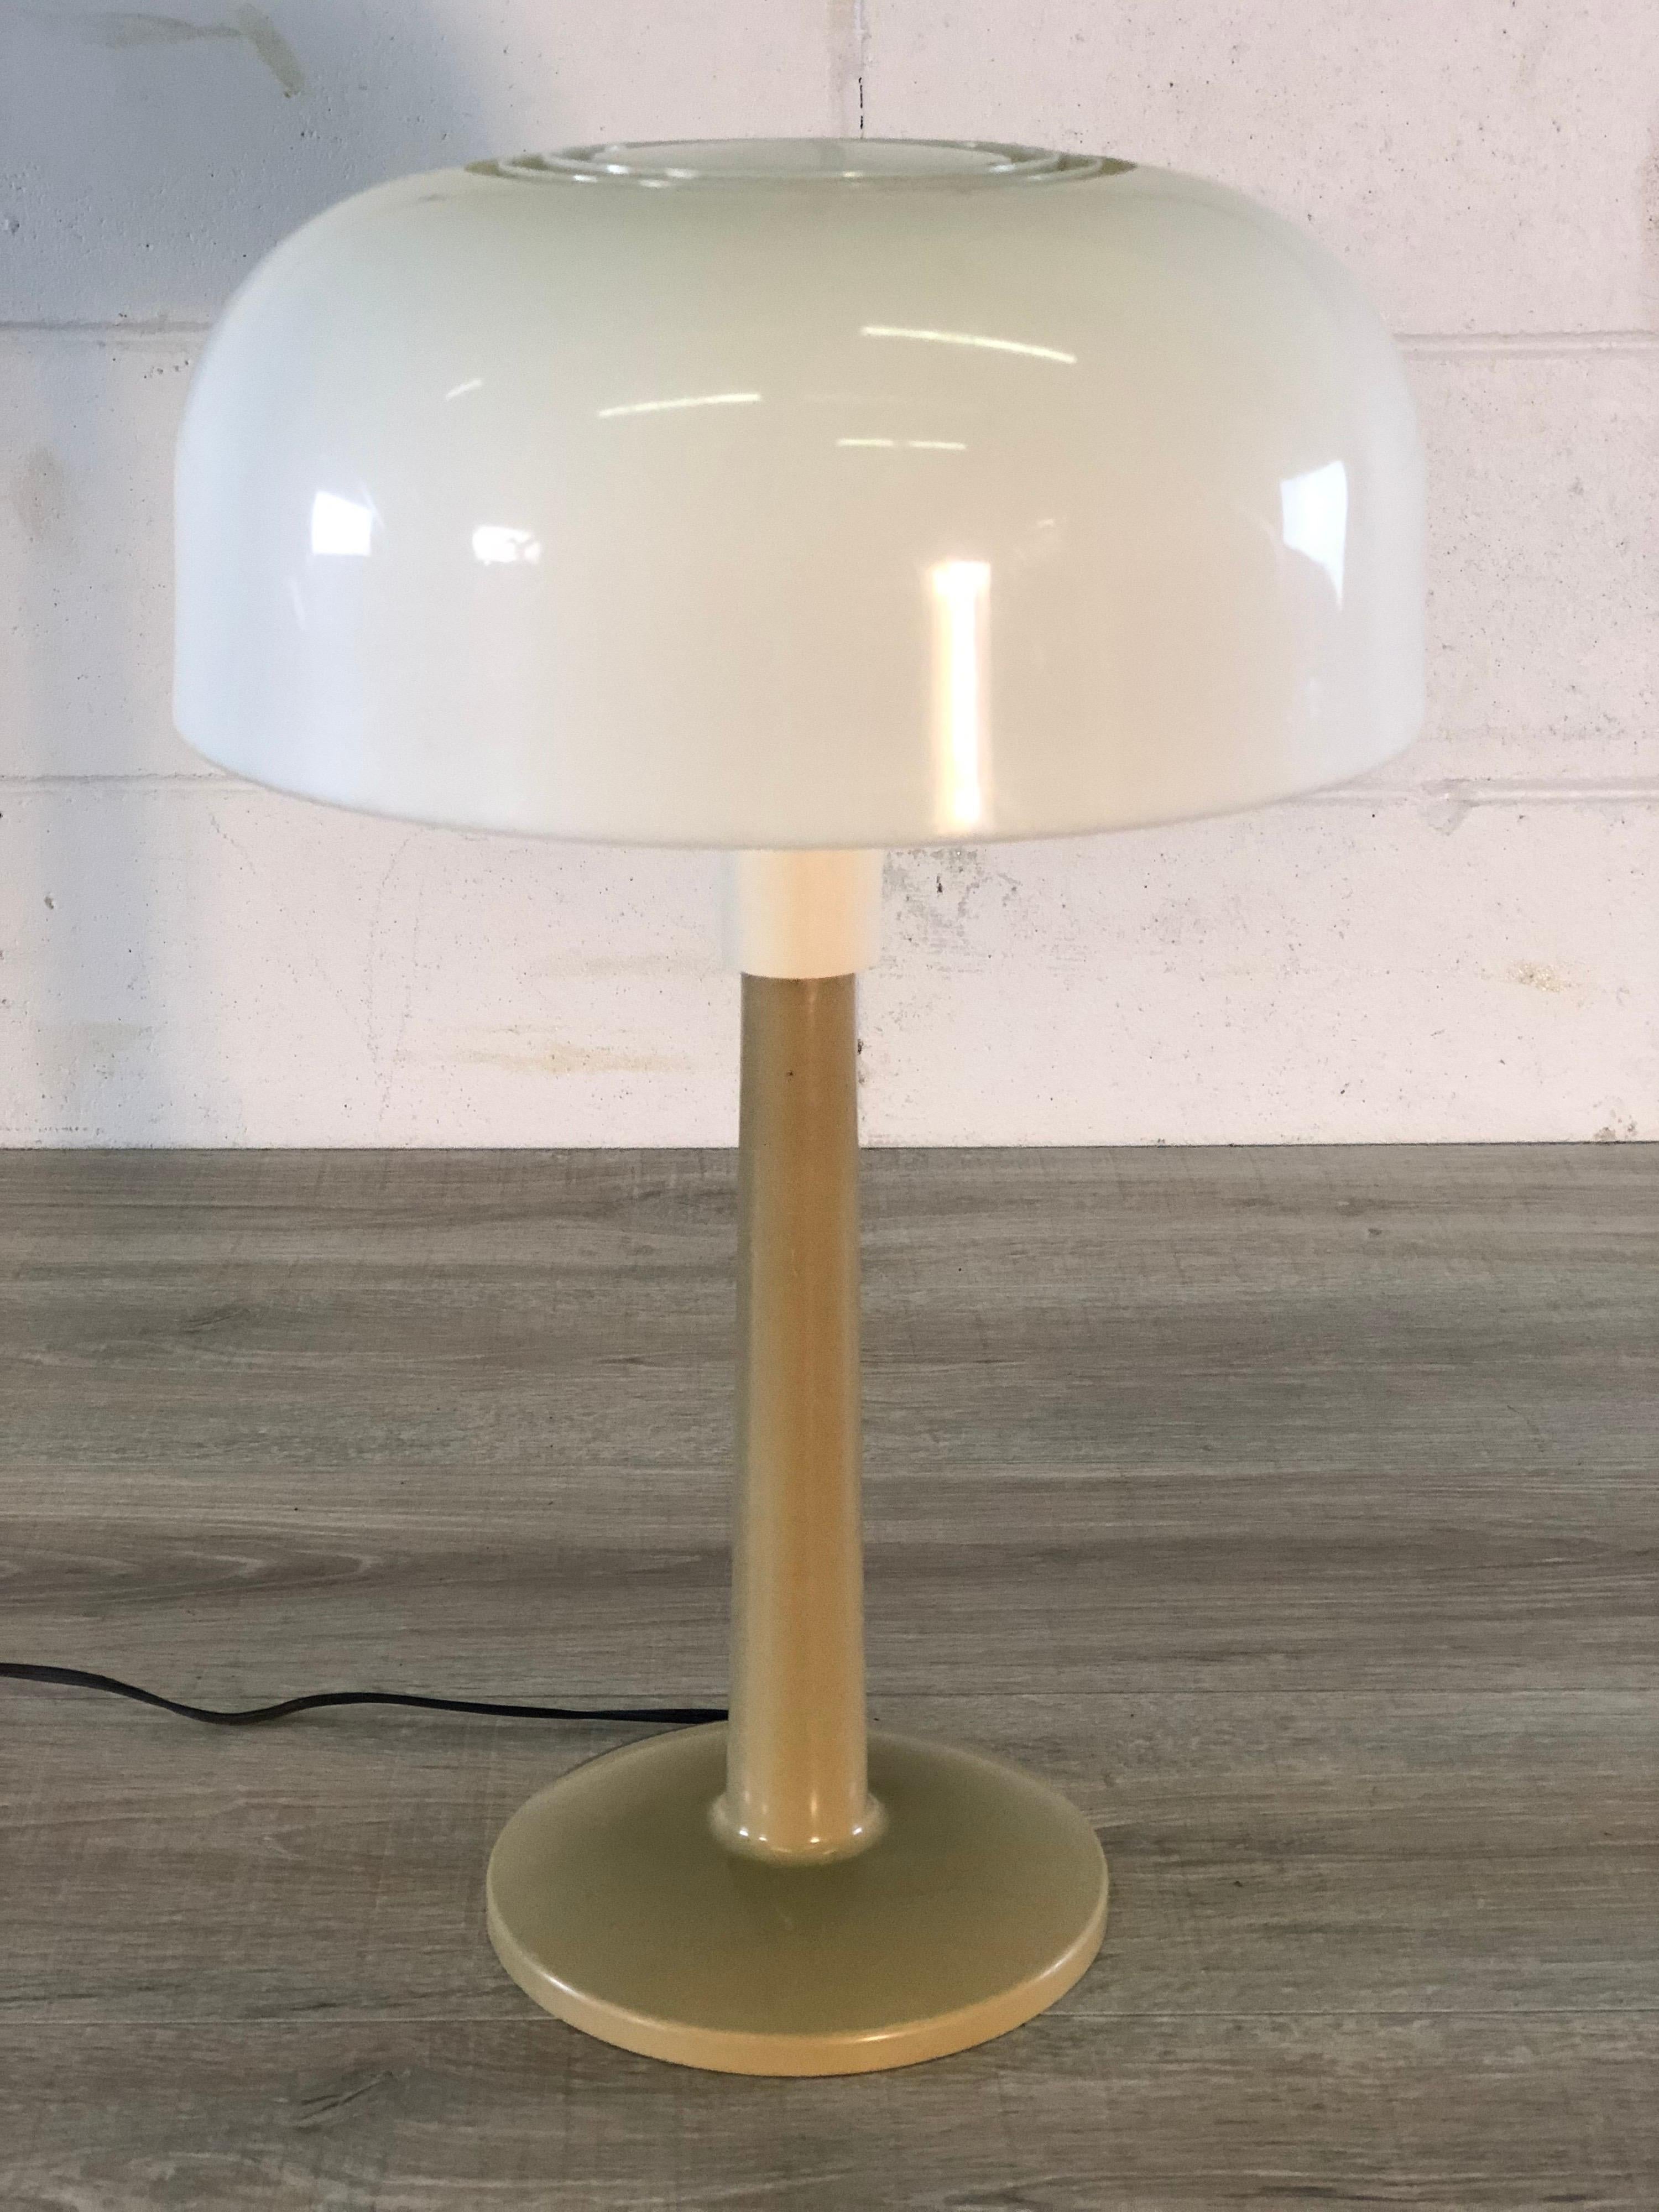 Vintage 1960s Gerald Thurston for Lightolier plastic table lamp with dome shaped shade. Wired for the US and in working condition. Max 150W bulb with 3-way lighting. This is in the gray / white combination.